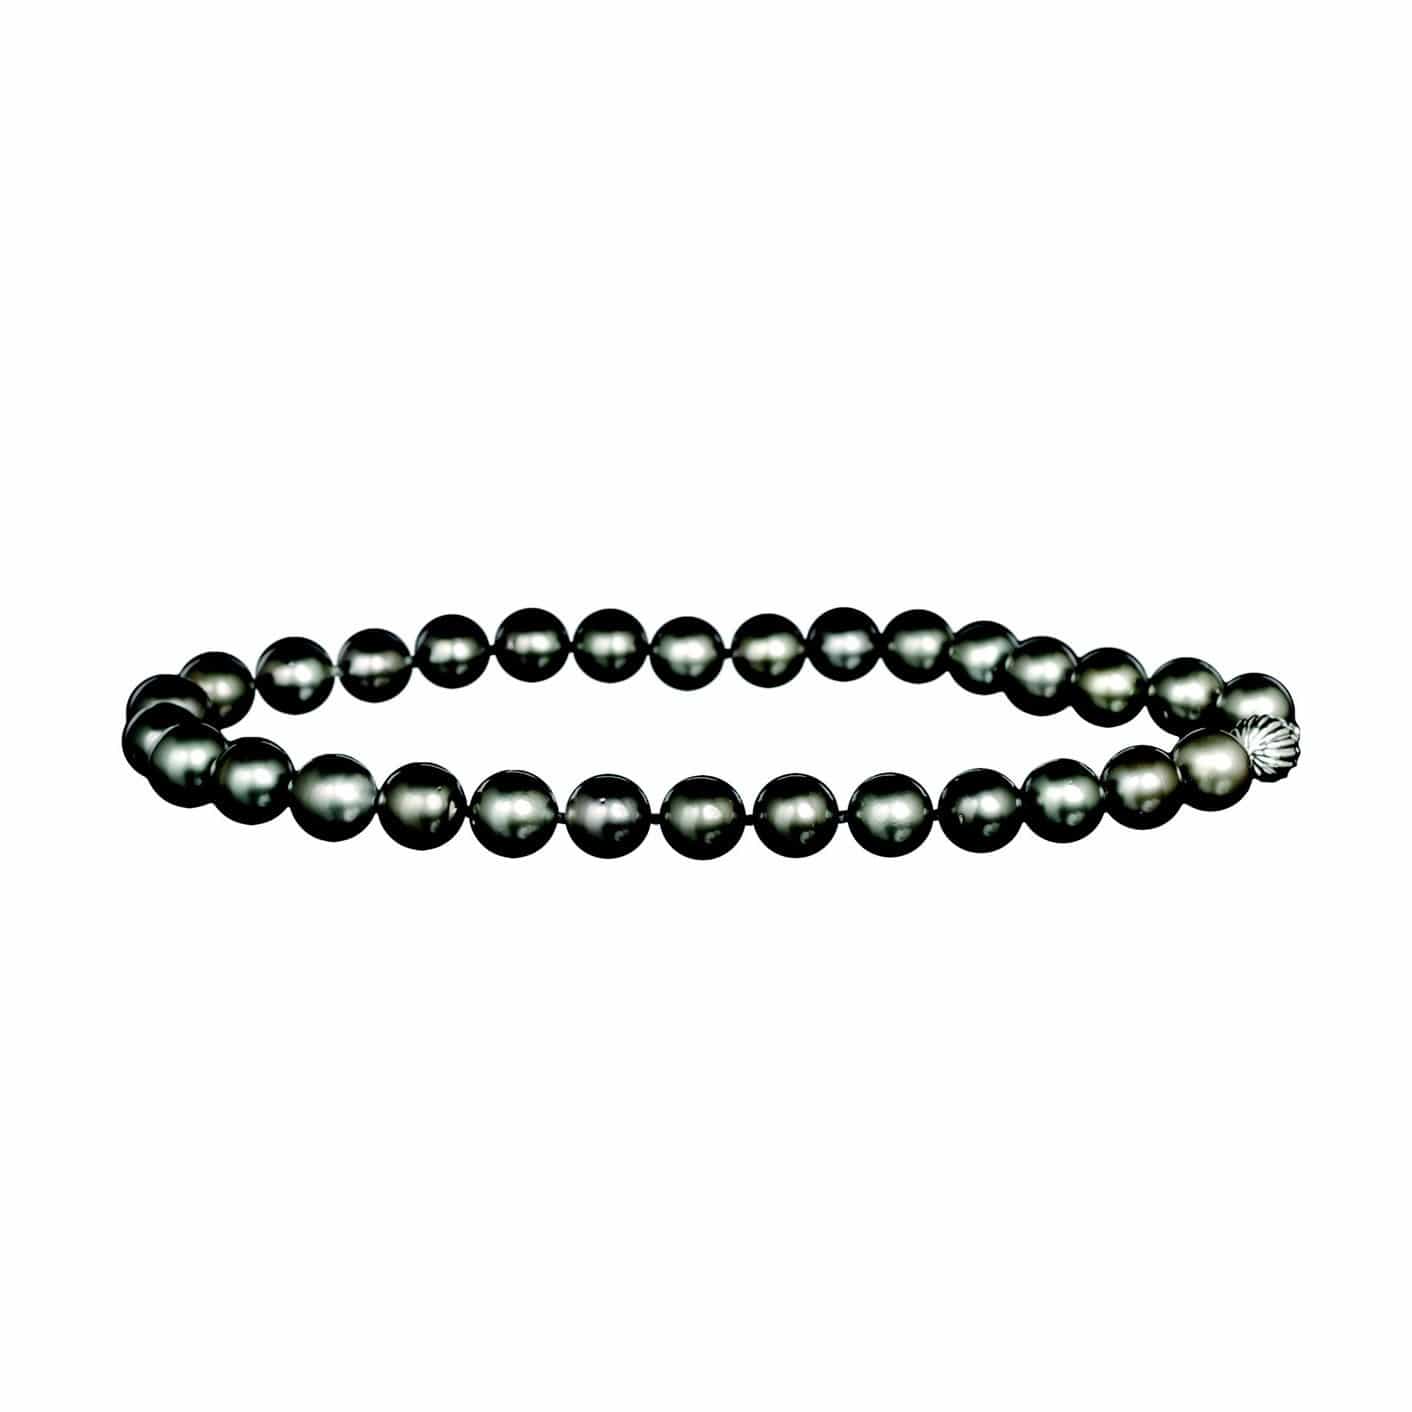 BLACK PEARLS - TAHITIAN PEARL NECKLACE - Chris Aire Fine Jewelry & Timepieces